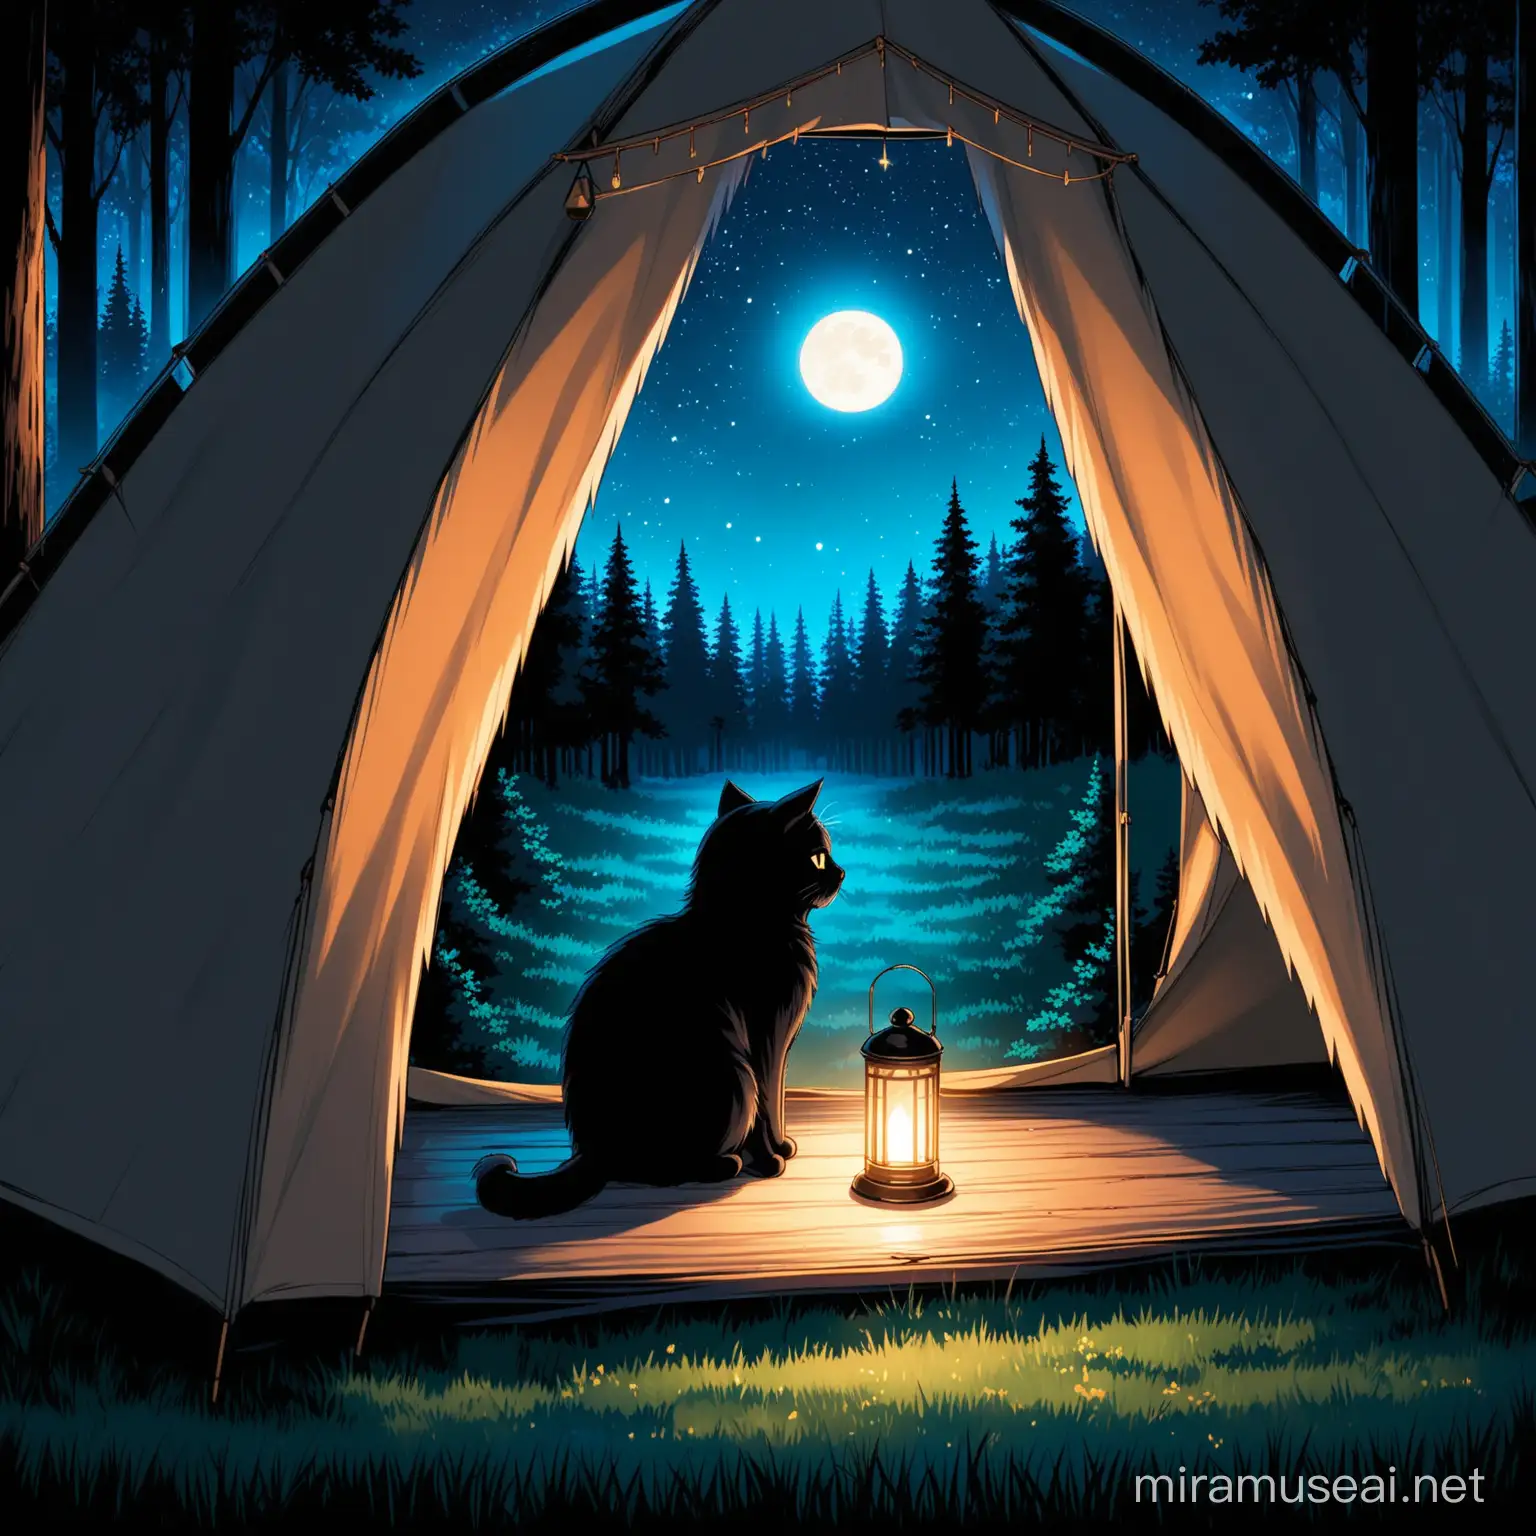 A black fluffy cat waits for the evening call to prayer in a tent with an open window in the forest at night.